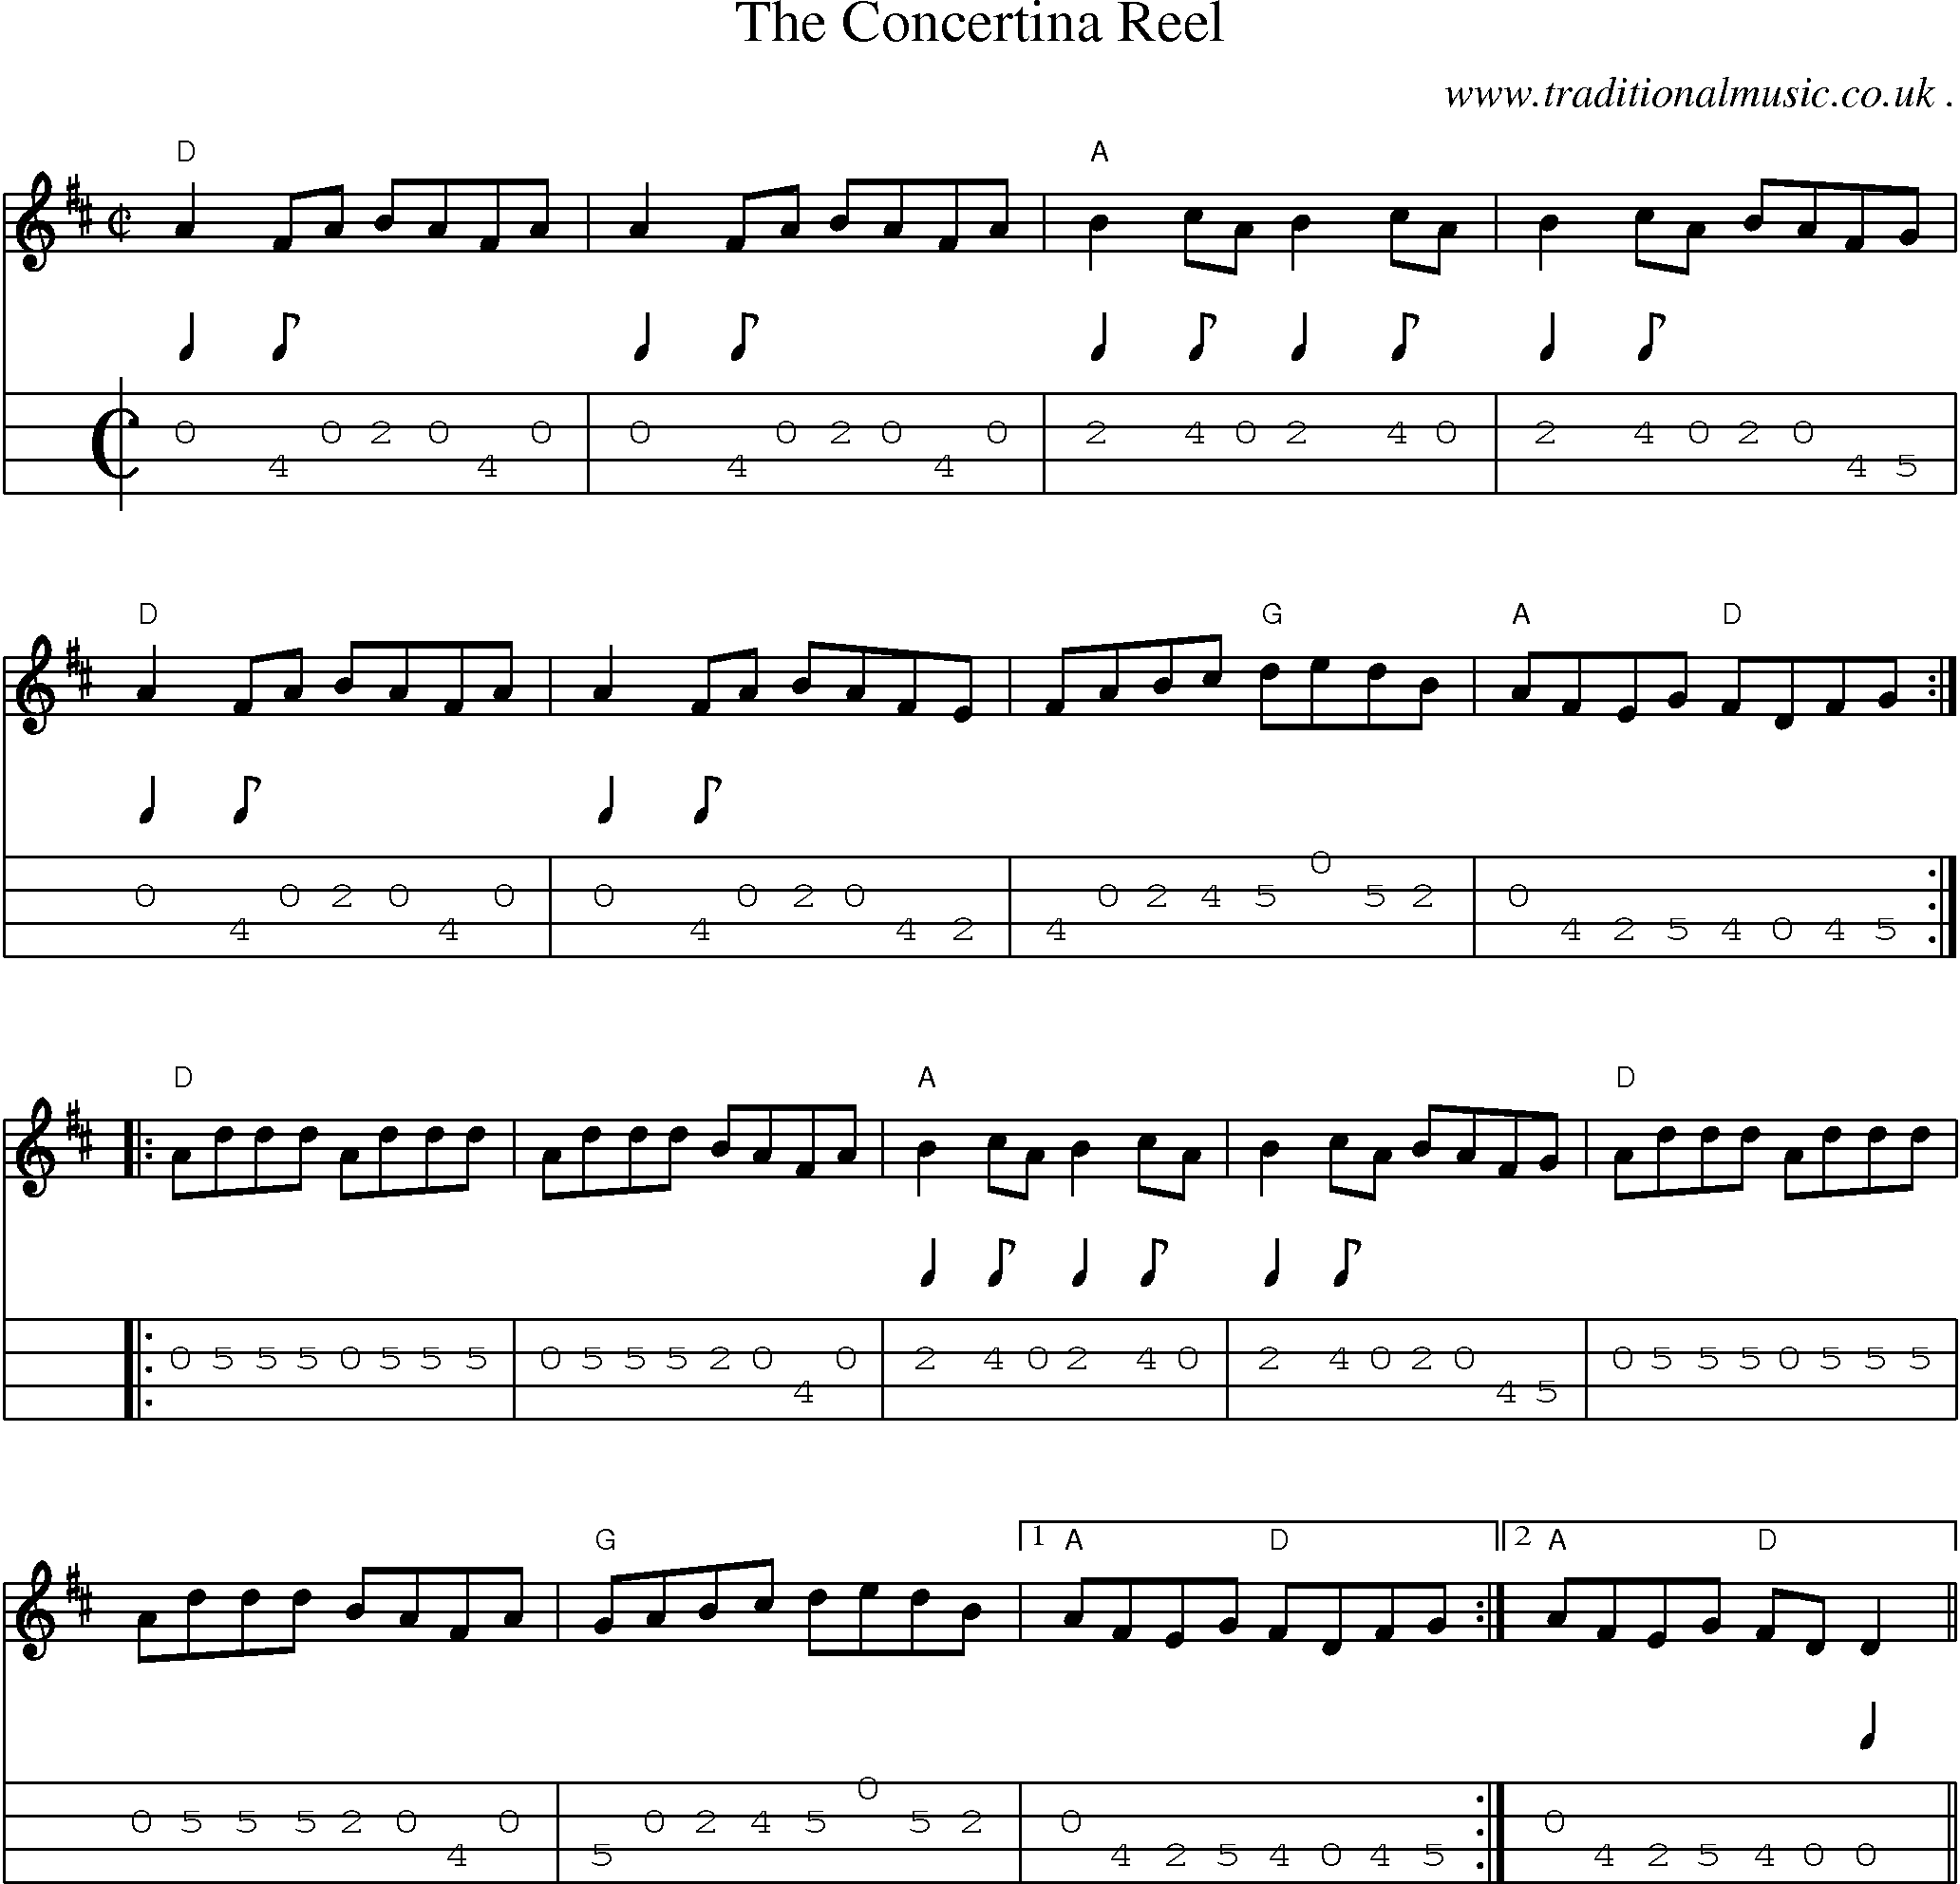 Music Score and Guitar Tabs for The Concertina Reel